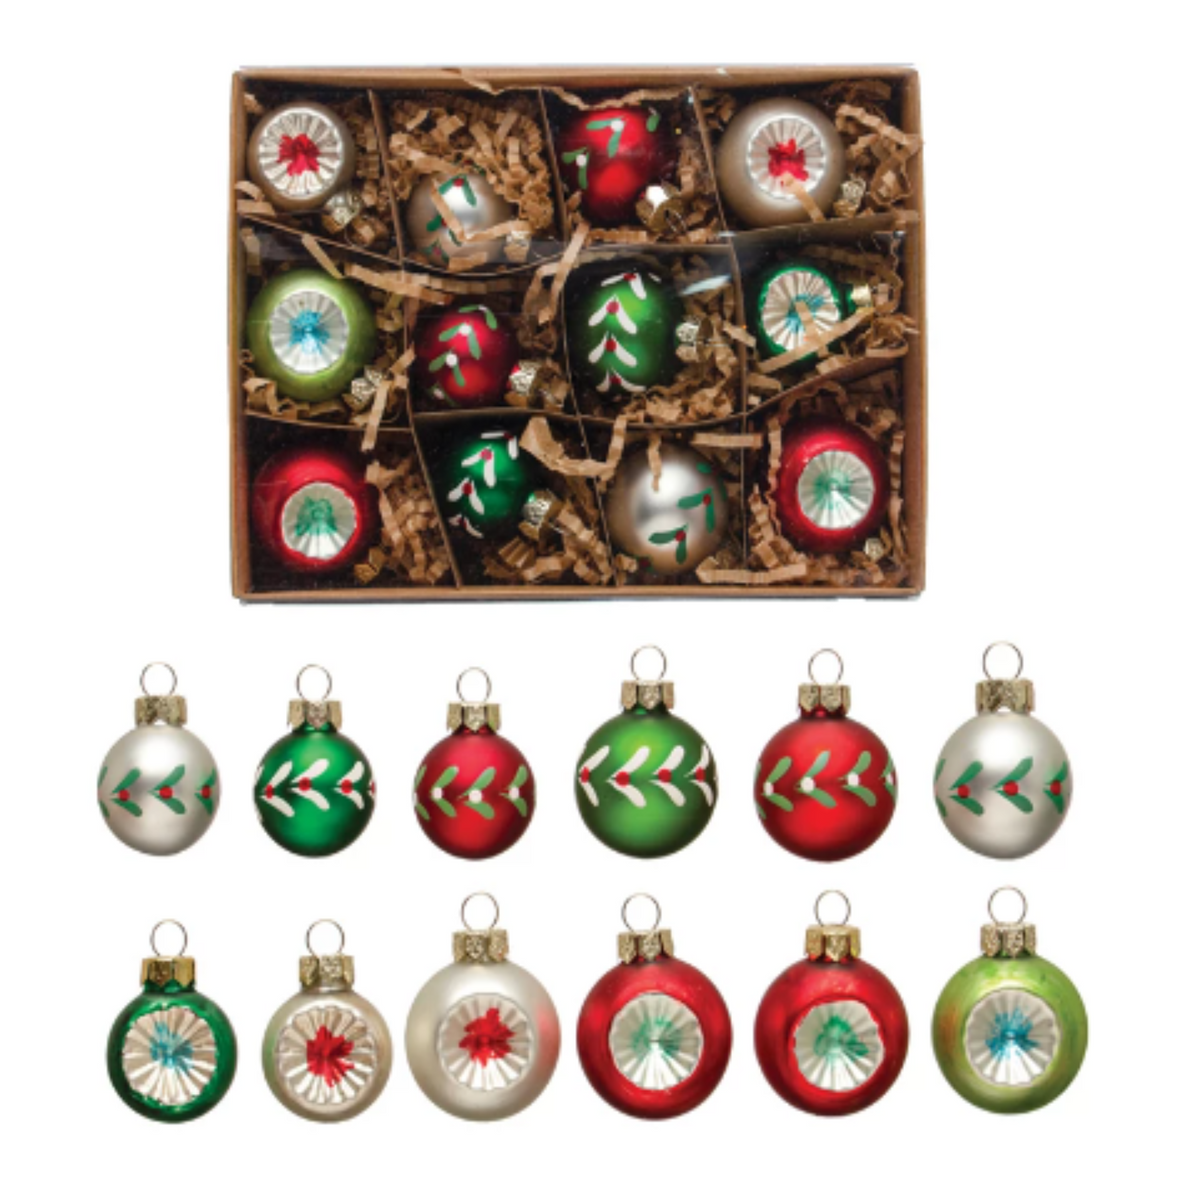 Round Hand-Painted Glass Ball Ornaments, Boxed Set of 12